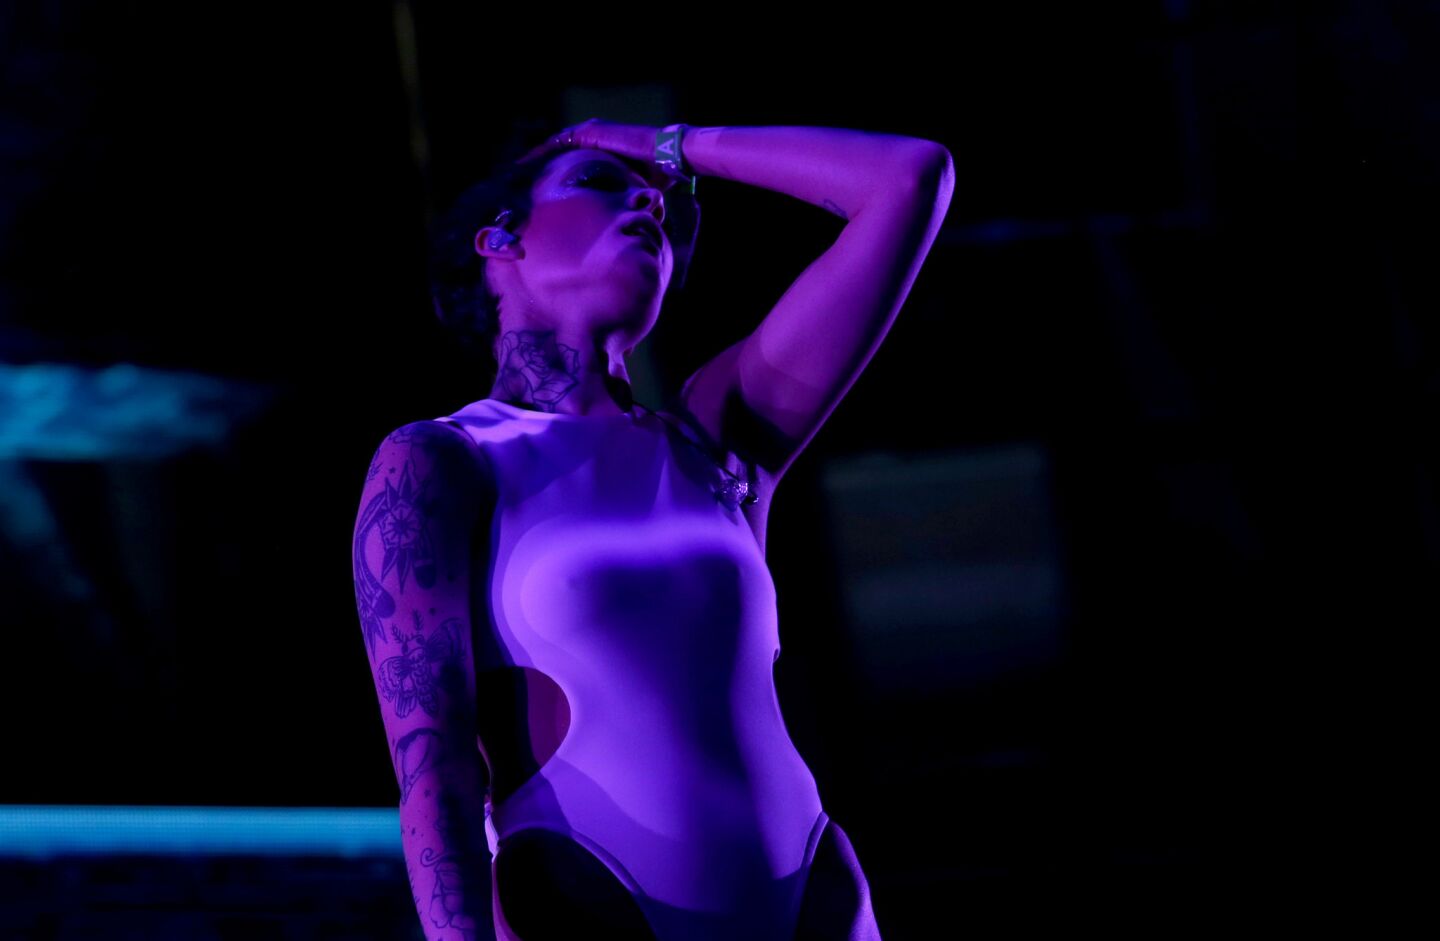 Electropop singer Halsey performs at the Coachella Music and Arts Festival on Saturday.